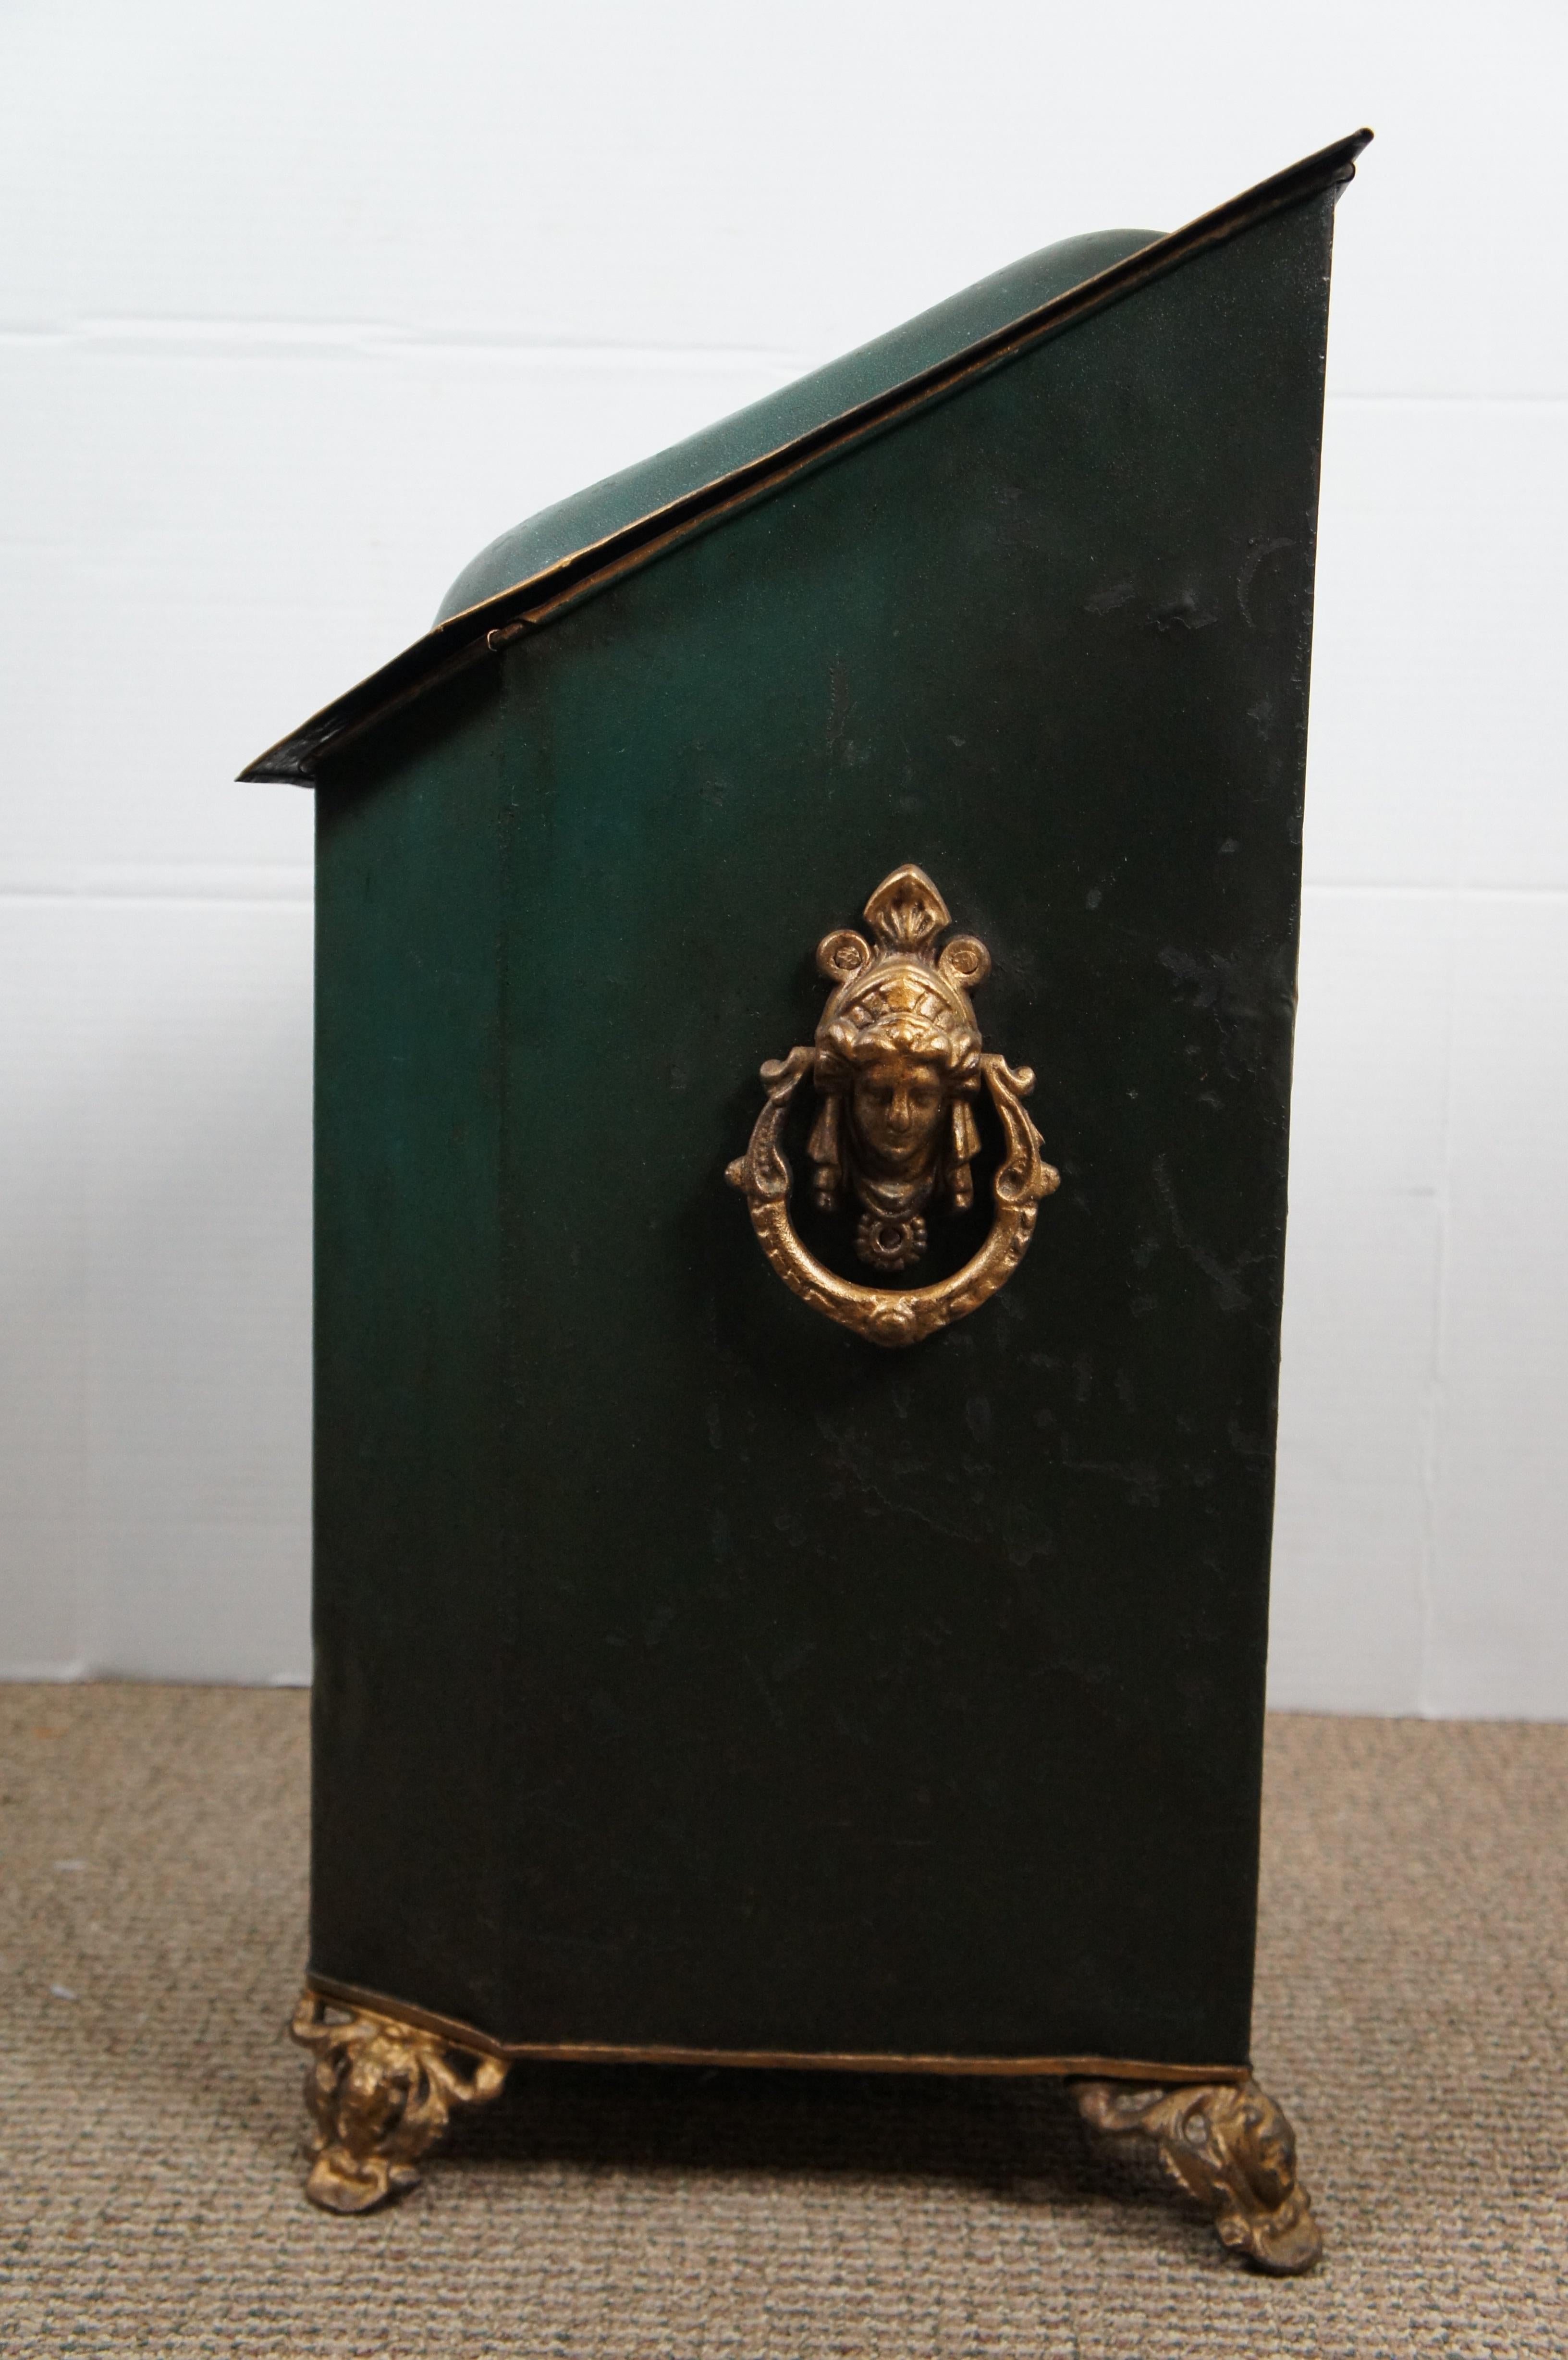 Antique Victorian Renaissance Revival Tole Coal Hod Scuttle Box Fireplace Bin In Good Condition For Sale In Dayton, OH